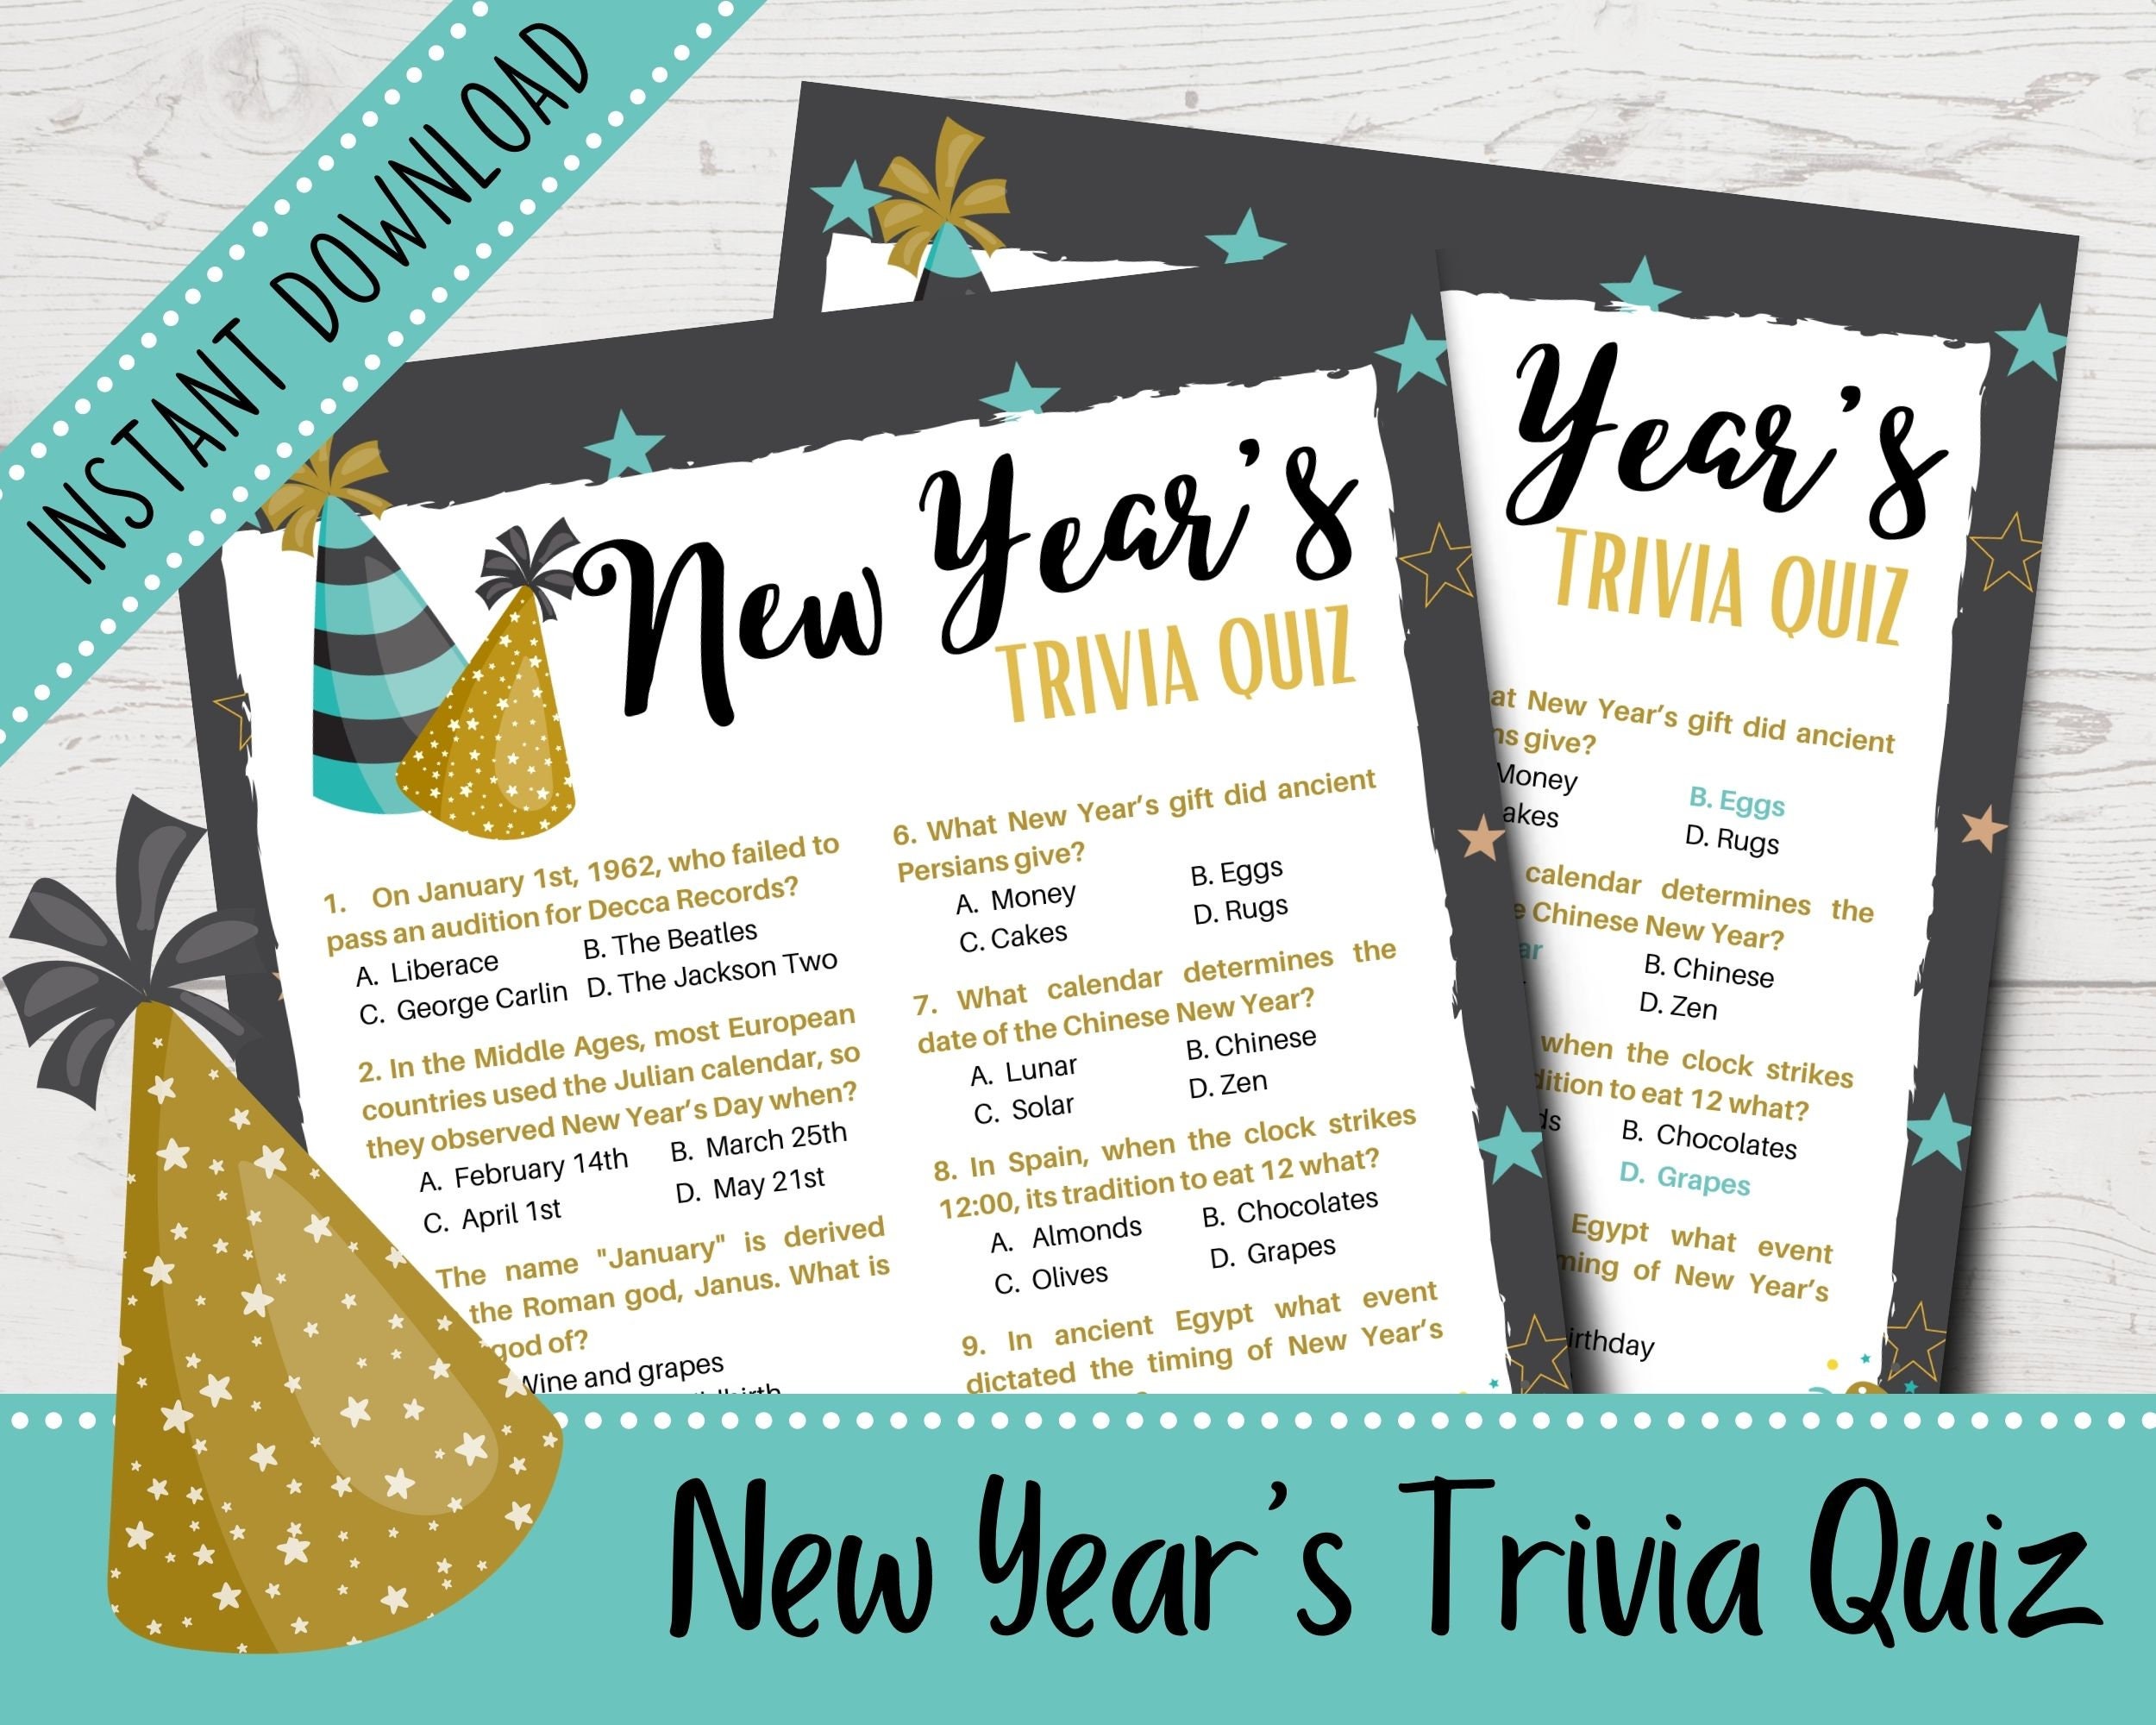 New Year's Trivia Quiz New Year's Eve Trivia Questions New Year's Eve